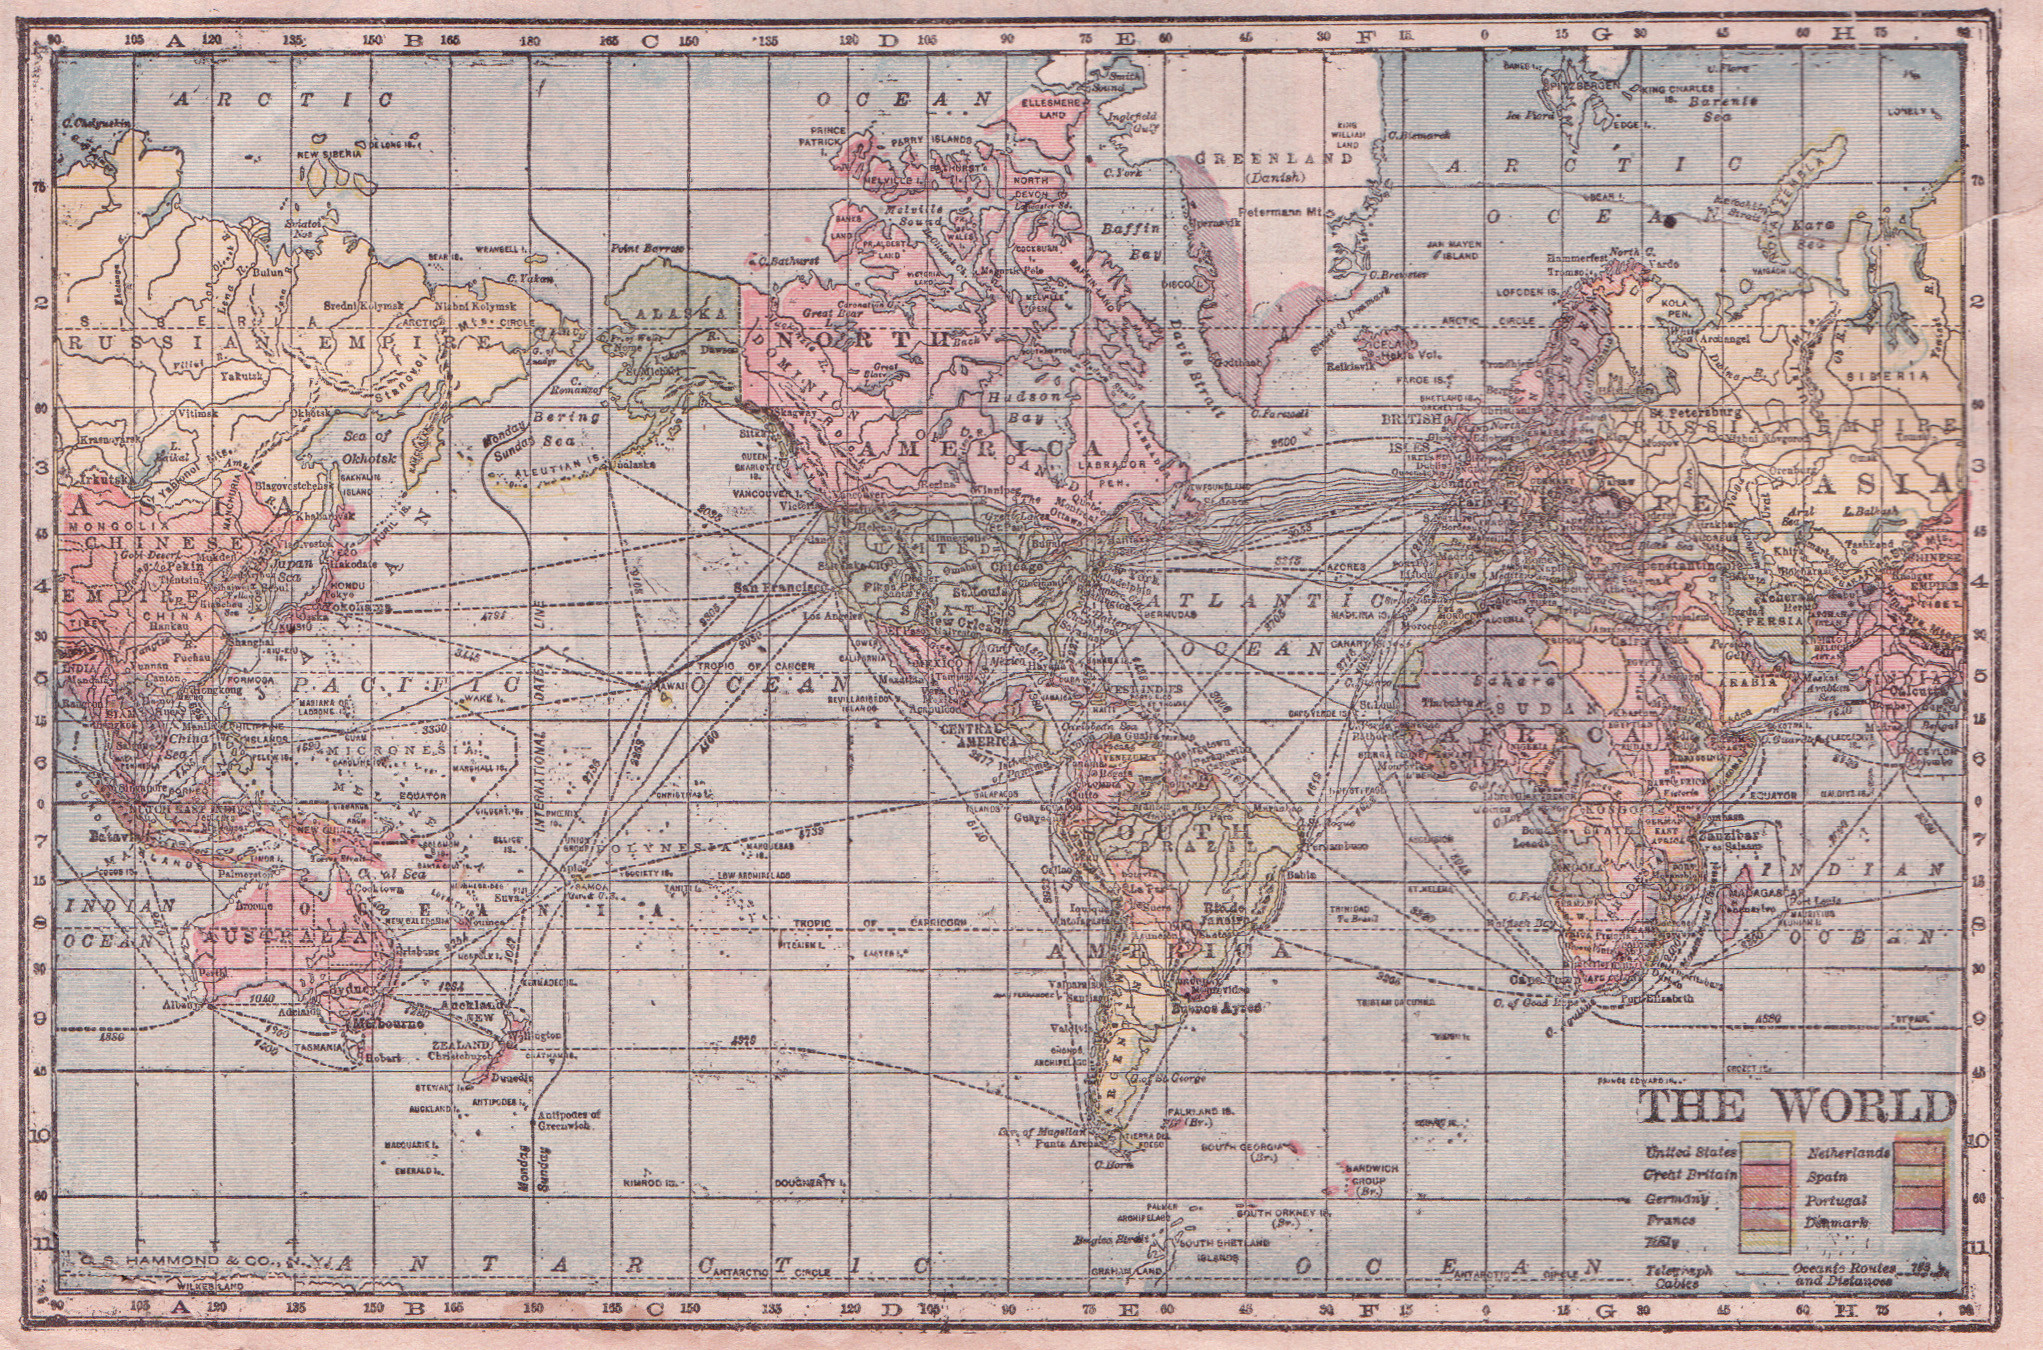 [Hammond Cylindrical Projection World Map 1905](https://www.flickr.com/photos/14277117@N03/4775662240) by [perpetualplum](https://www.flickr.com/photos/14277117@N03) is licensed under [CC BY 2.0](https://creativecommons.org/licenses/by/2.0/?ref=ccsearch&atype=rich)